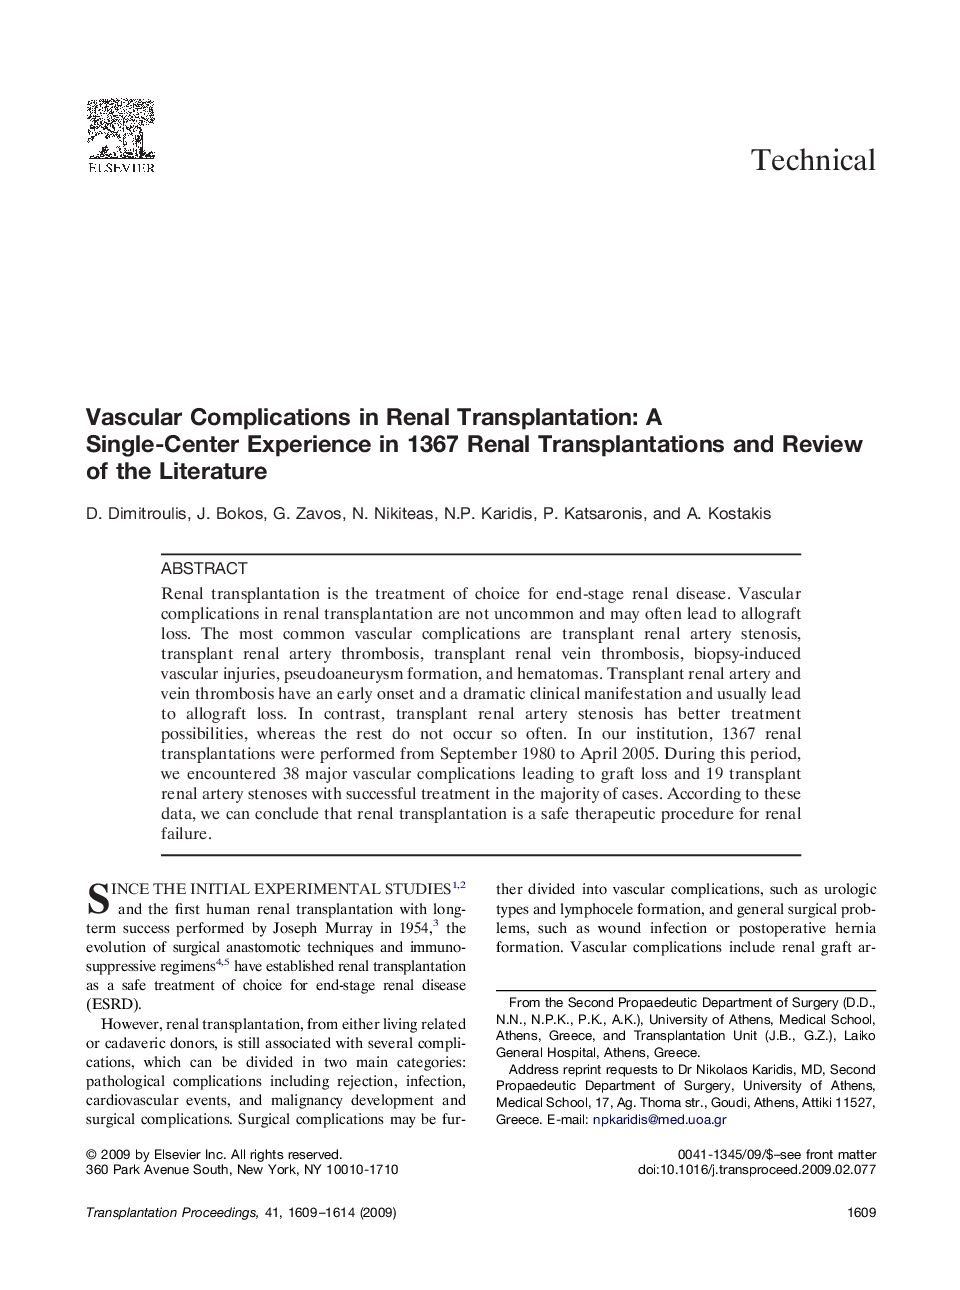 Vascular Complications in Renal Transplantation: A Single-Center Experience in 1367 Renal Transplantations and Review of the Literature